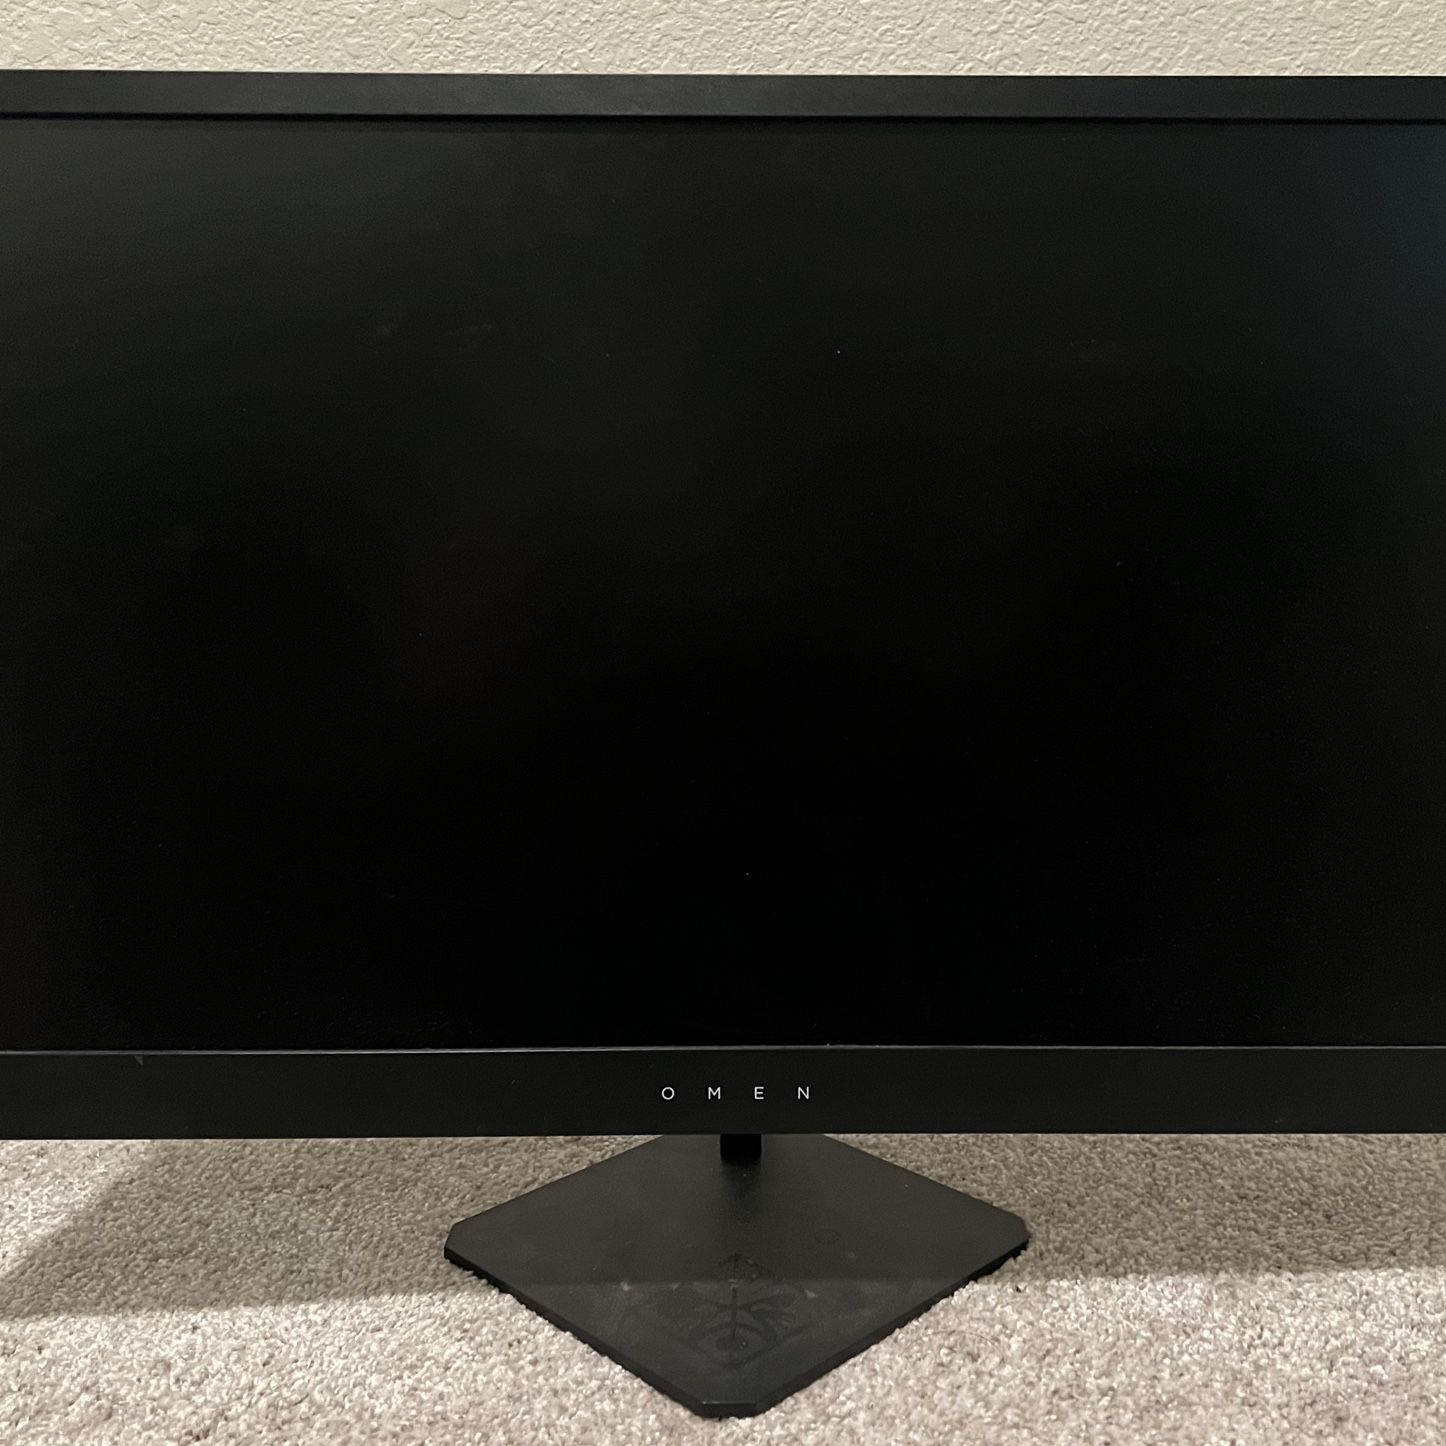 Omen By HP Gaming Monitor, 25” Great Condition